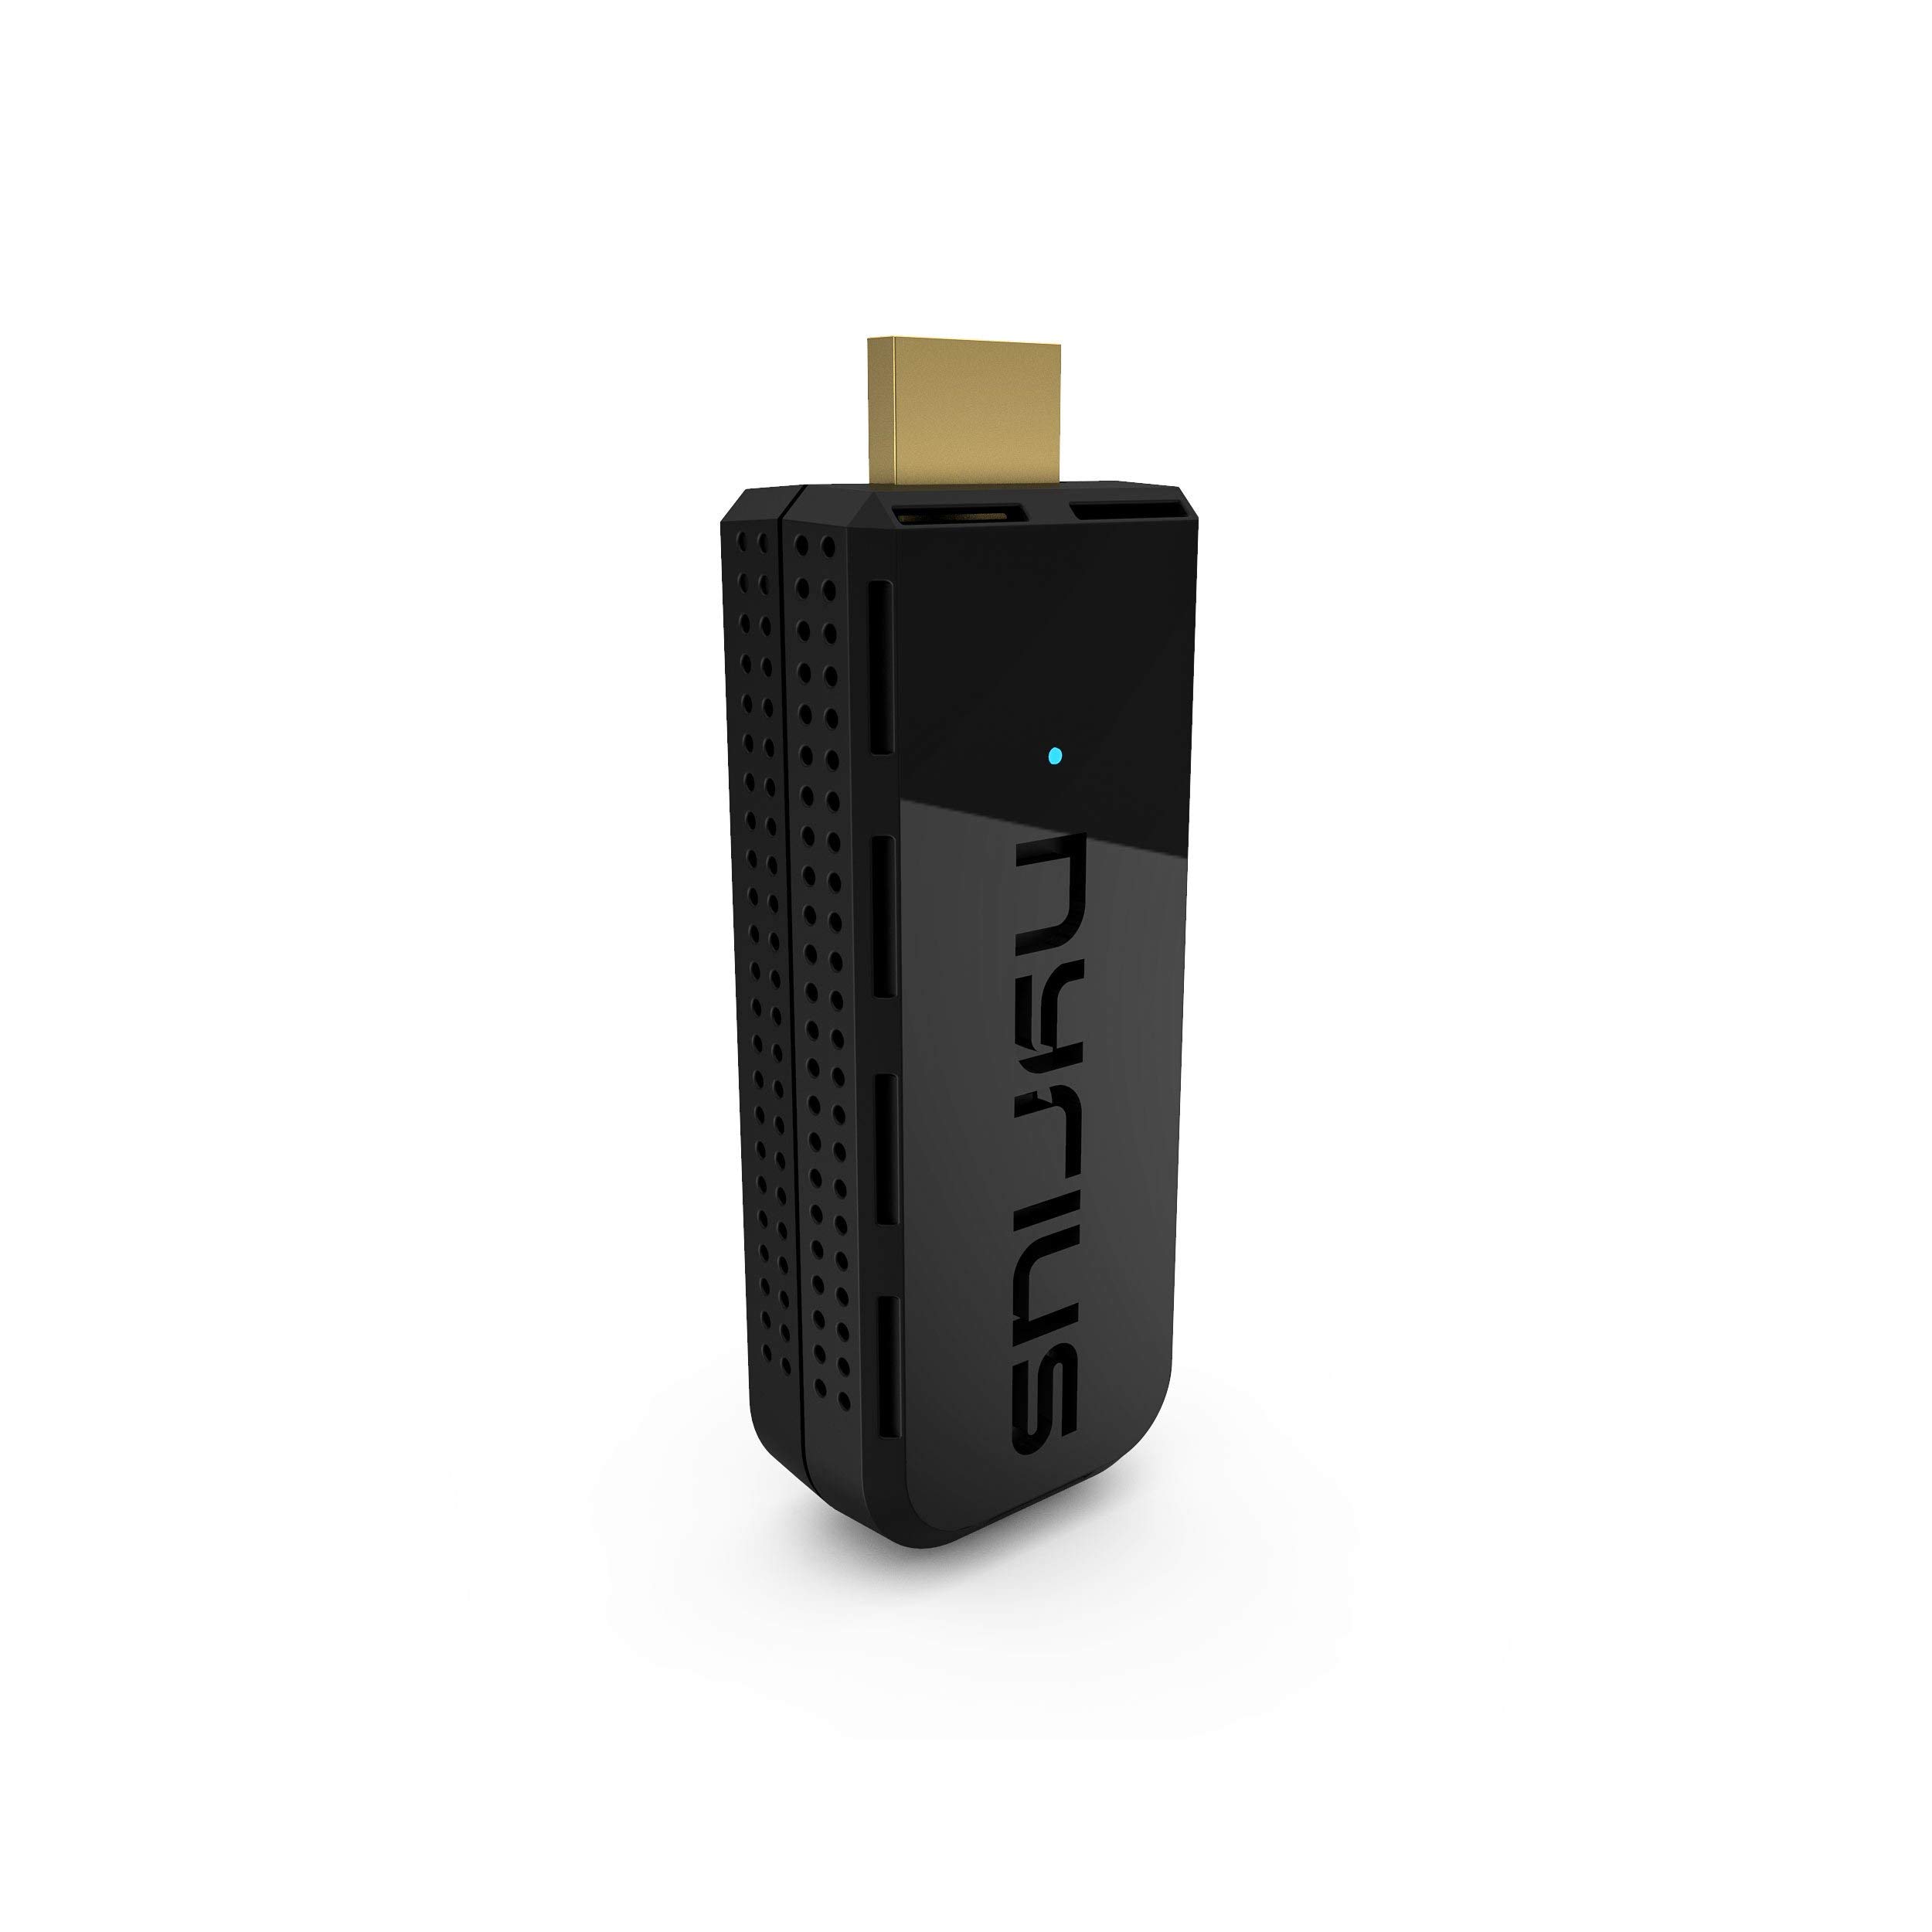 Nyrius Aries Prime Wireless Video HDMI Transmitter & Receiver for Streaming HD 1080p 3D Video & Digital Audio from Laptop, PC, Cable, Netflix, YouTube, PS to HDTV/Projector (NPCS549)